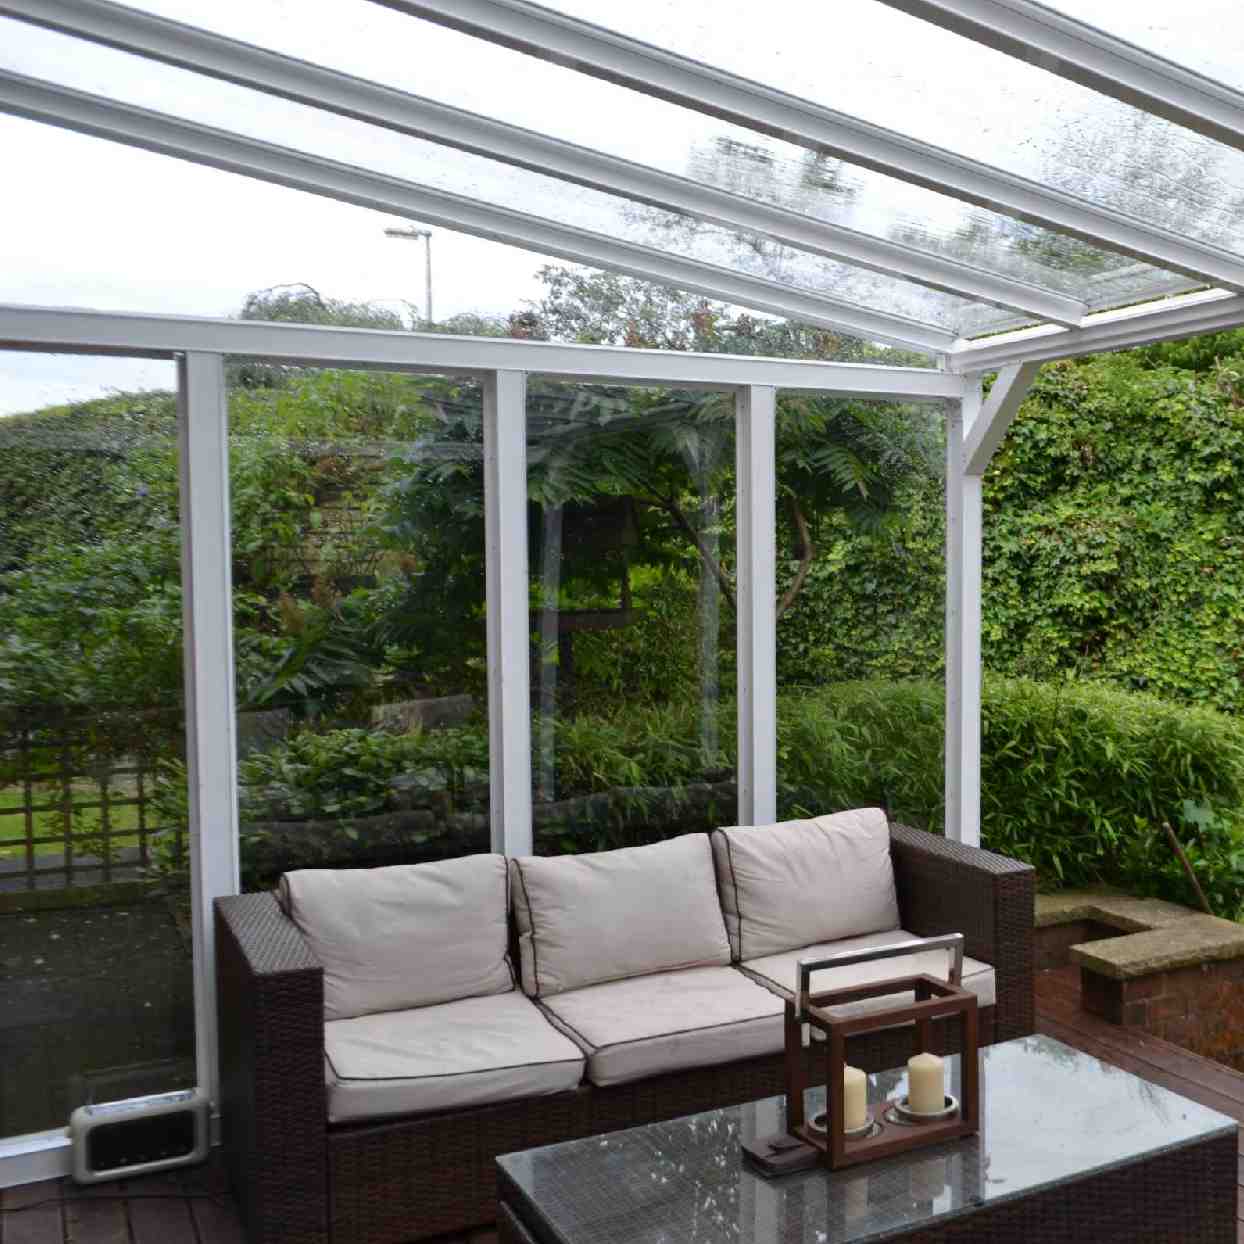 Buy Omega Verandah White with 16mm Polycarbonate Glazing - 6.3m (W) x 4.5m (P), (4) Supporting Posts online today